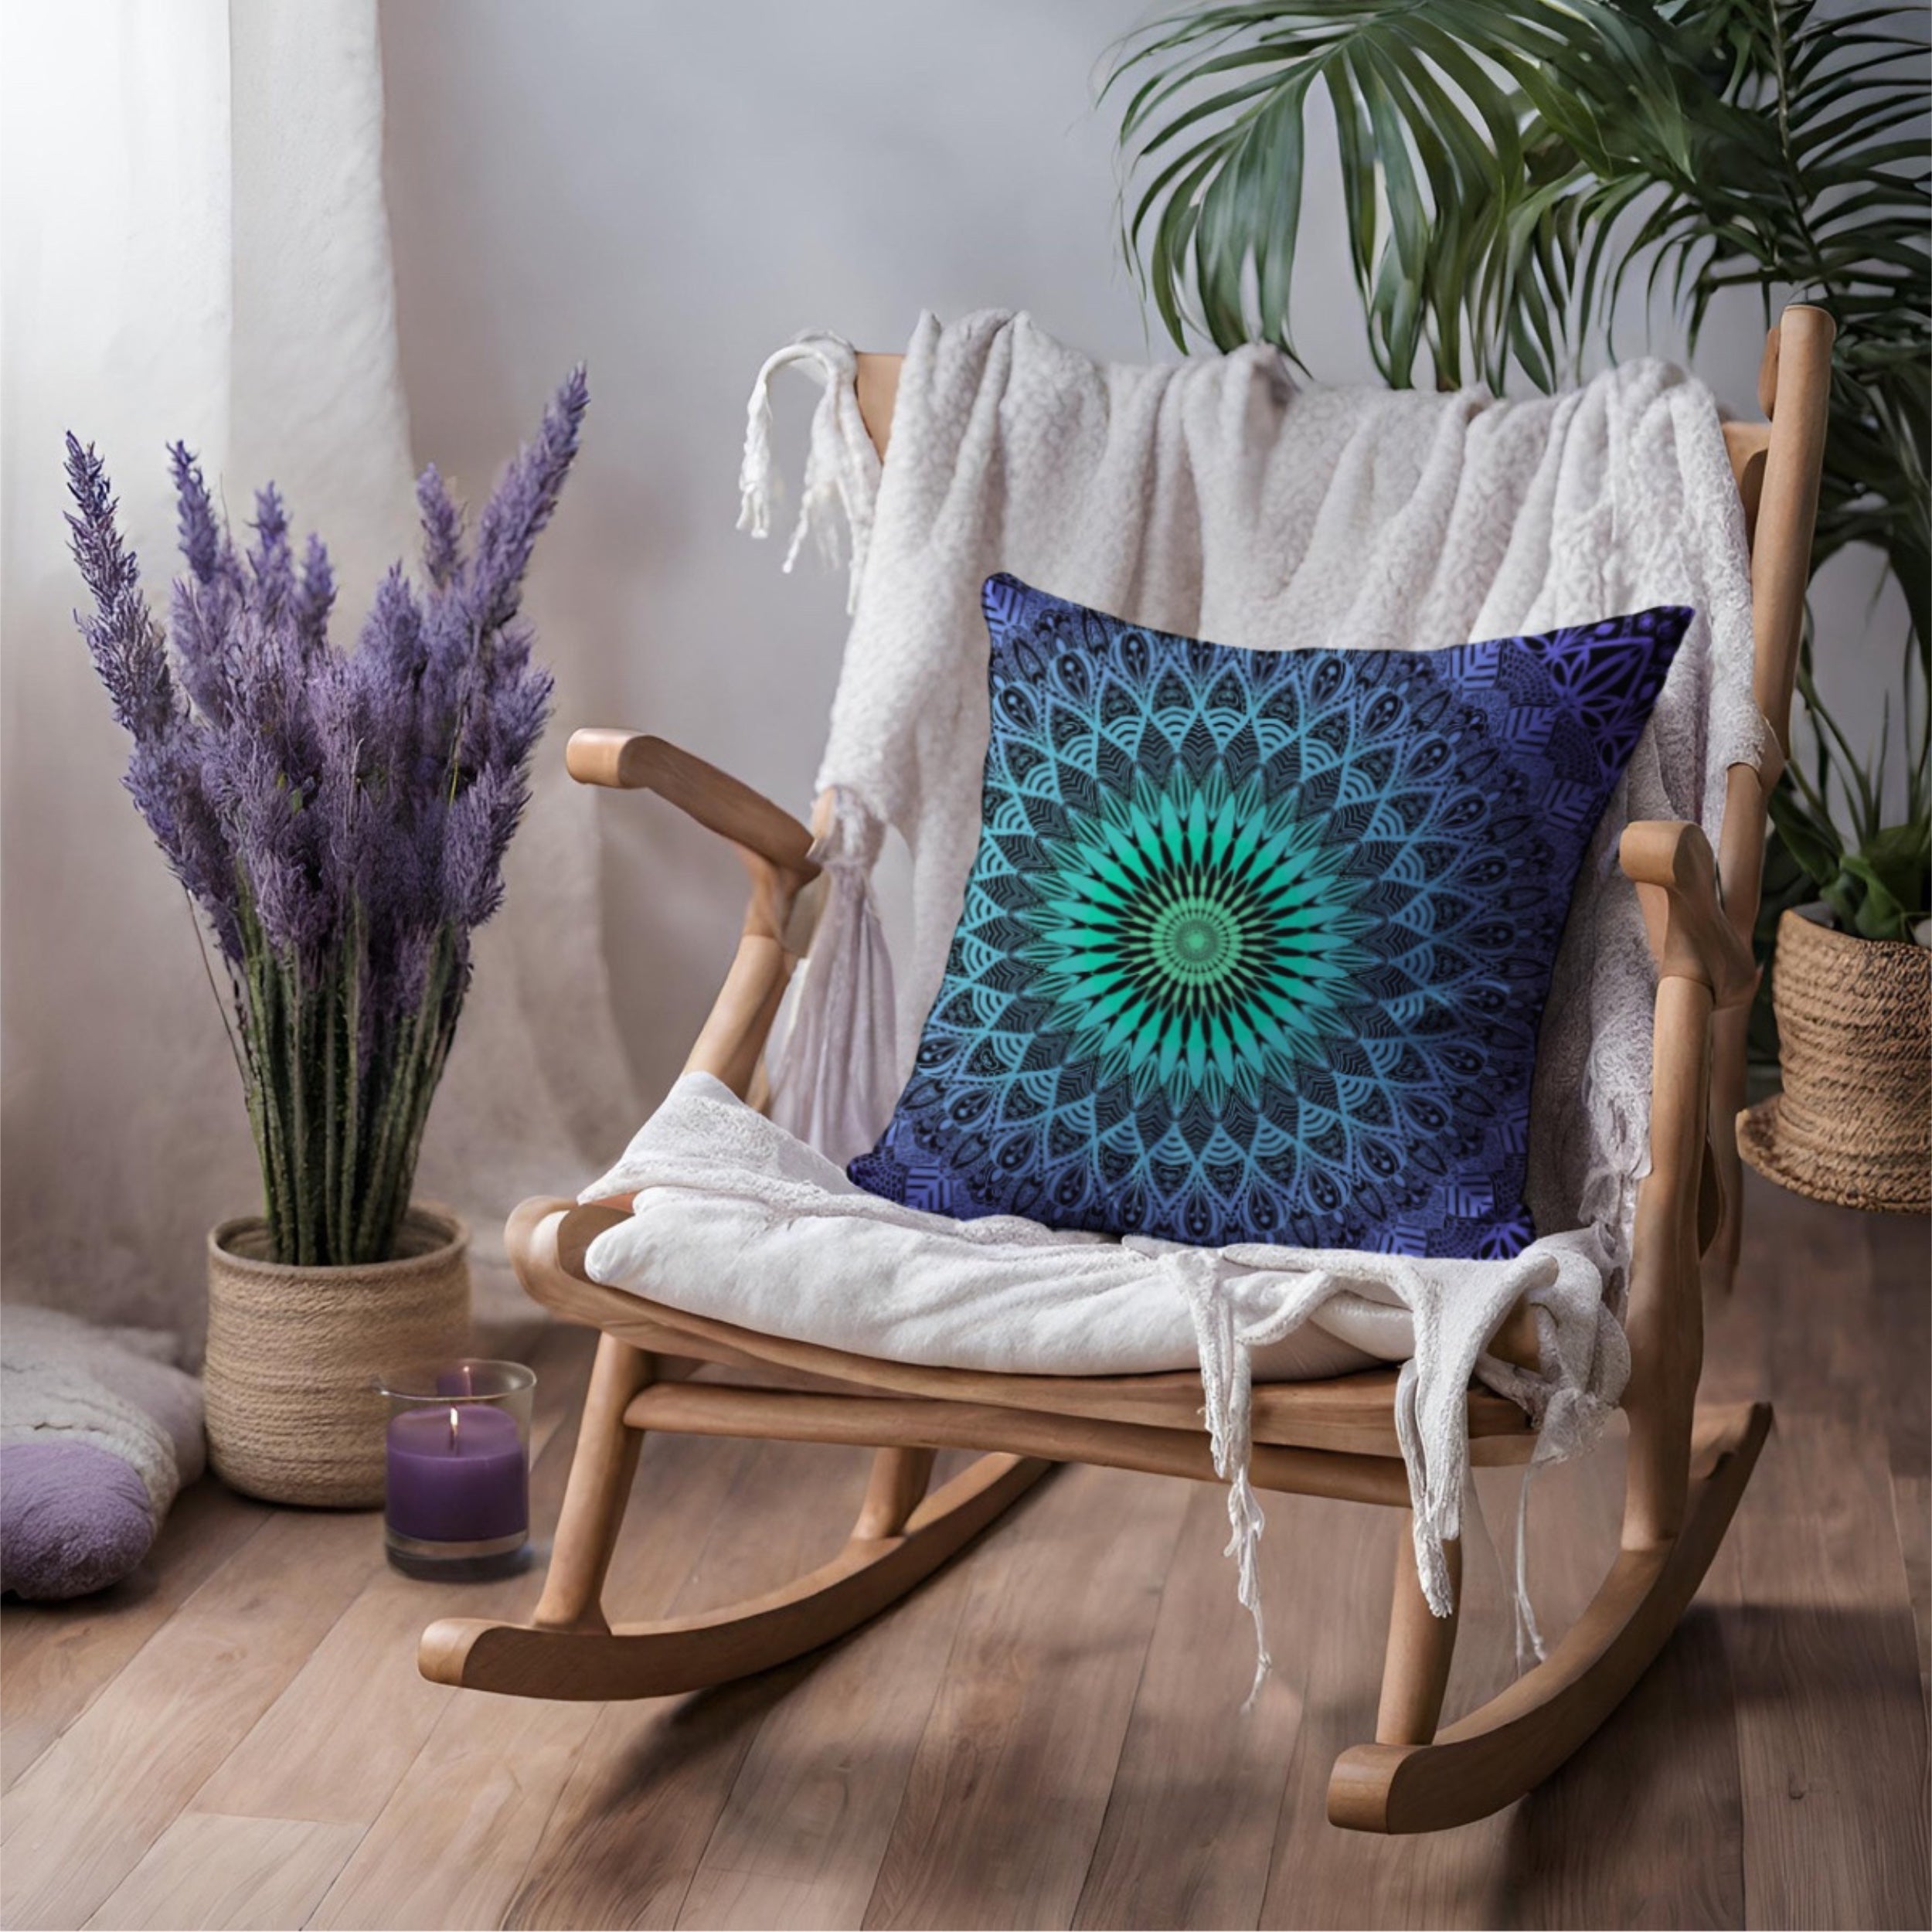 Rocking Chair  having a throw Pillow with a mandala design on it in purple, lavender and mint color from webshop Mandala Stone